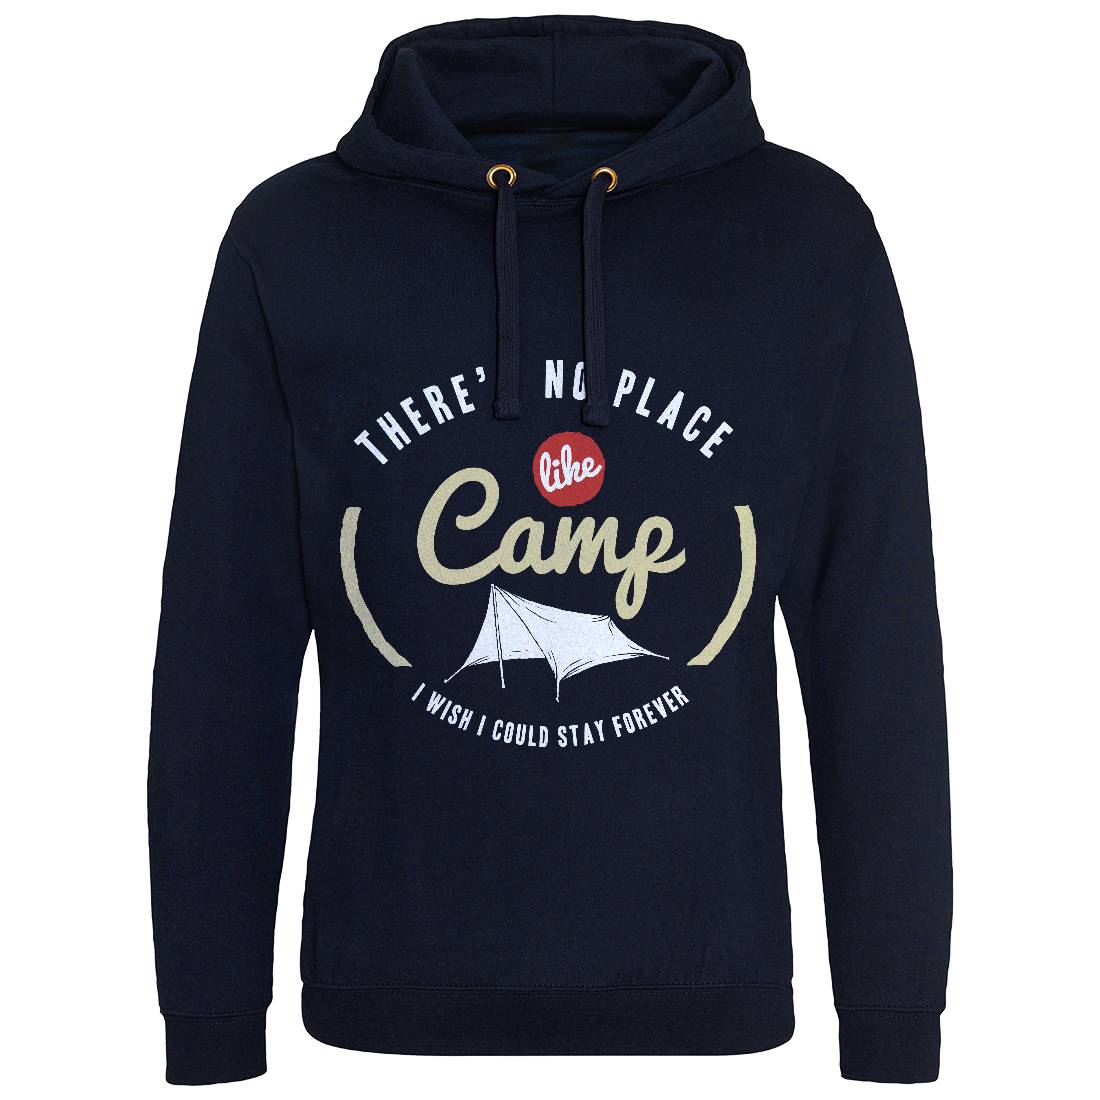 No Place Like Camp Mens Hoodie Without Pocket Nature A353